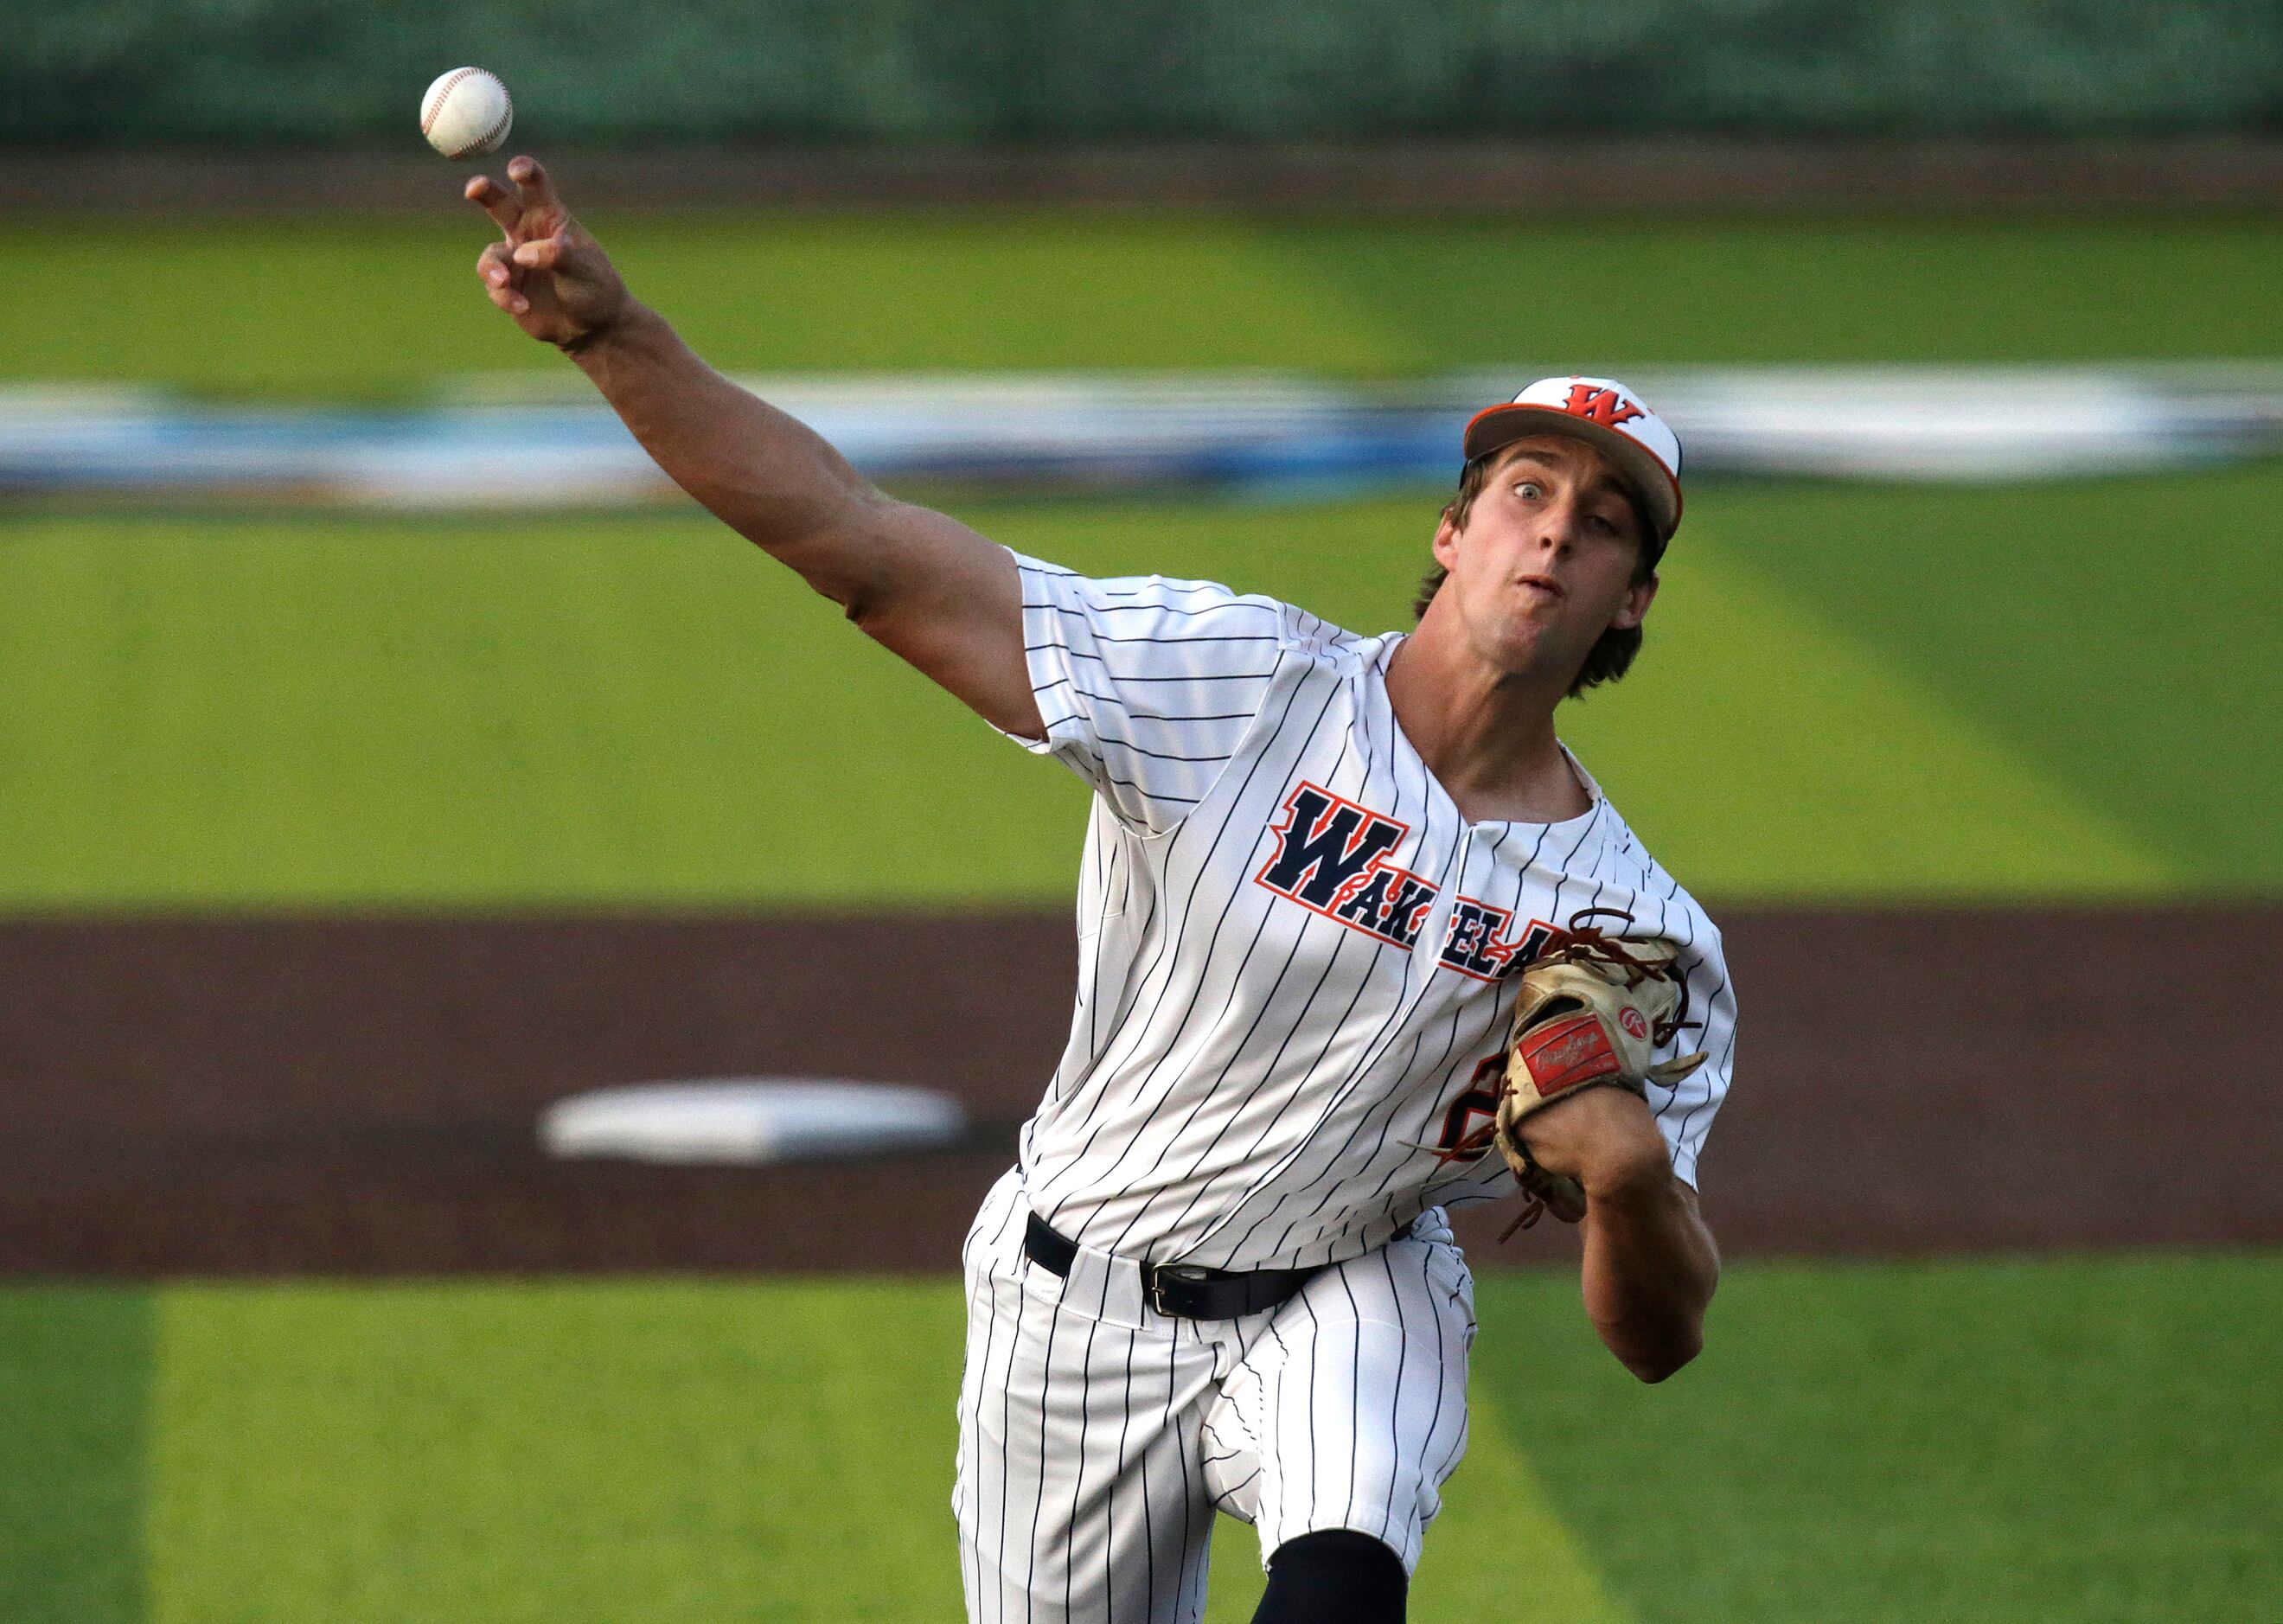 Wakeland High School pitcher Carson Priebe (22) delivers a pitch in the first inning as...